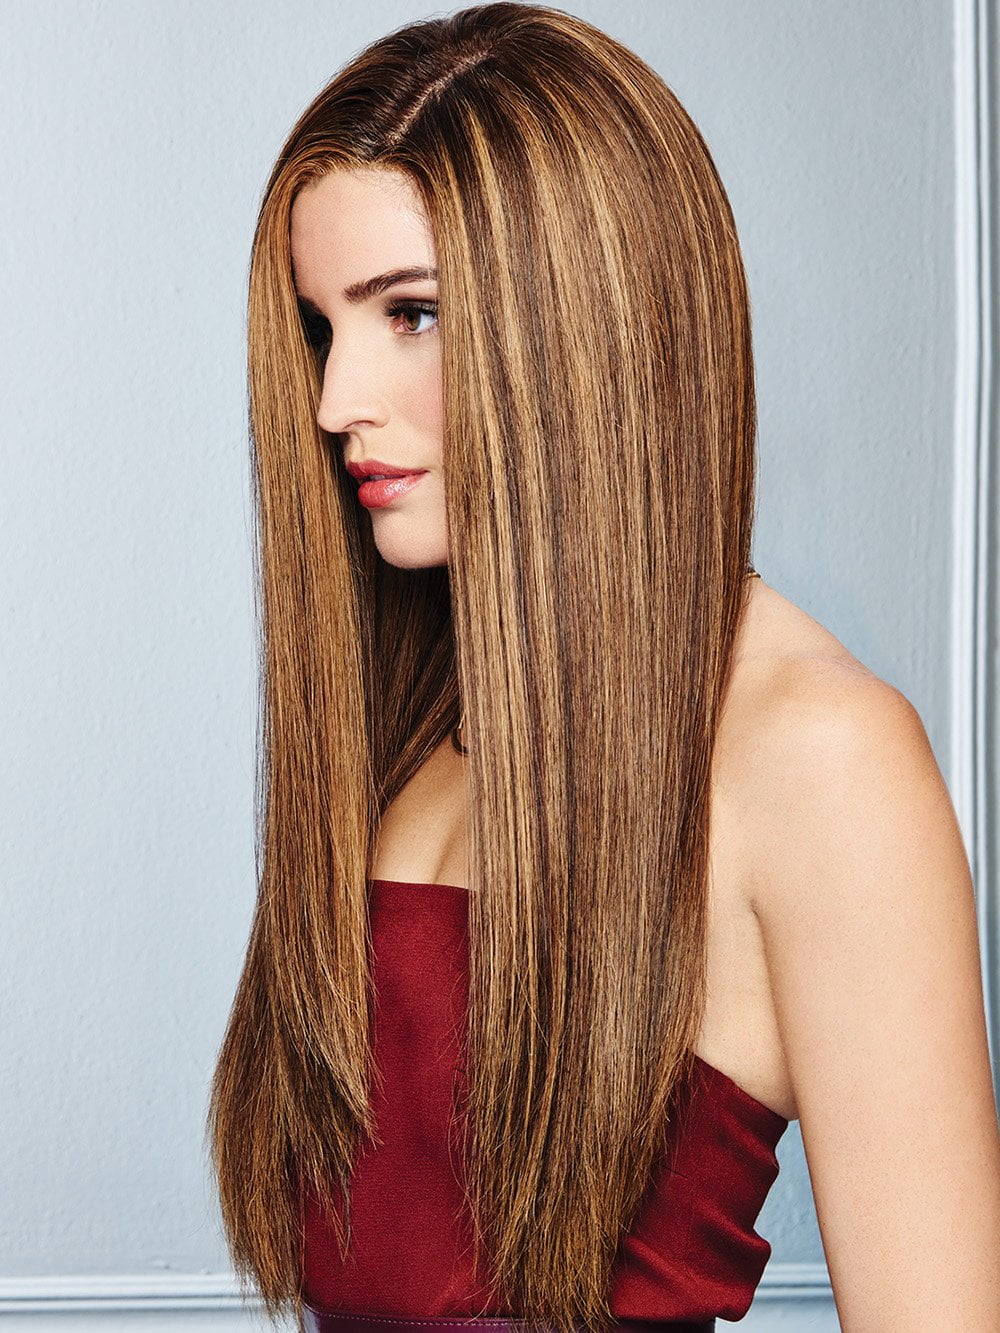 Long barely there layers add flow and movement to this superwoman length